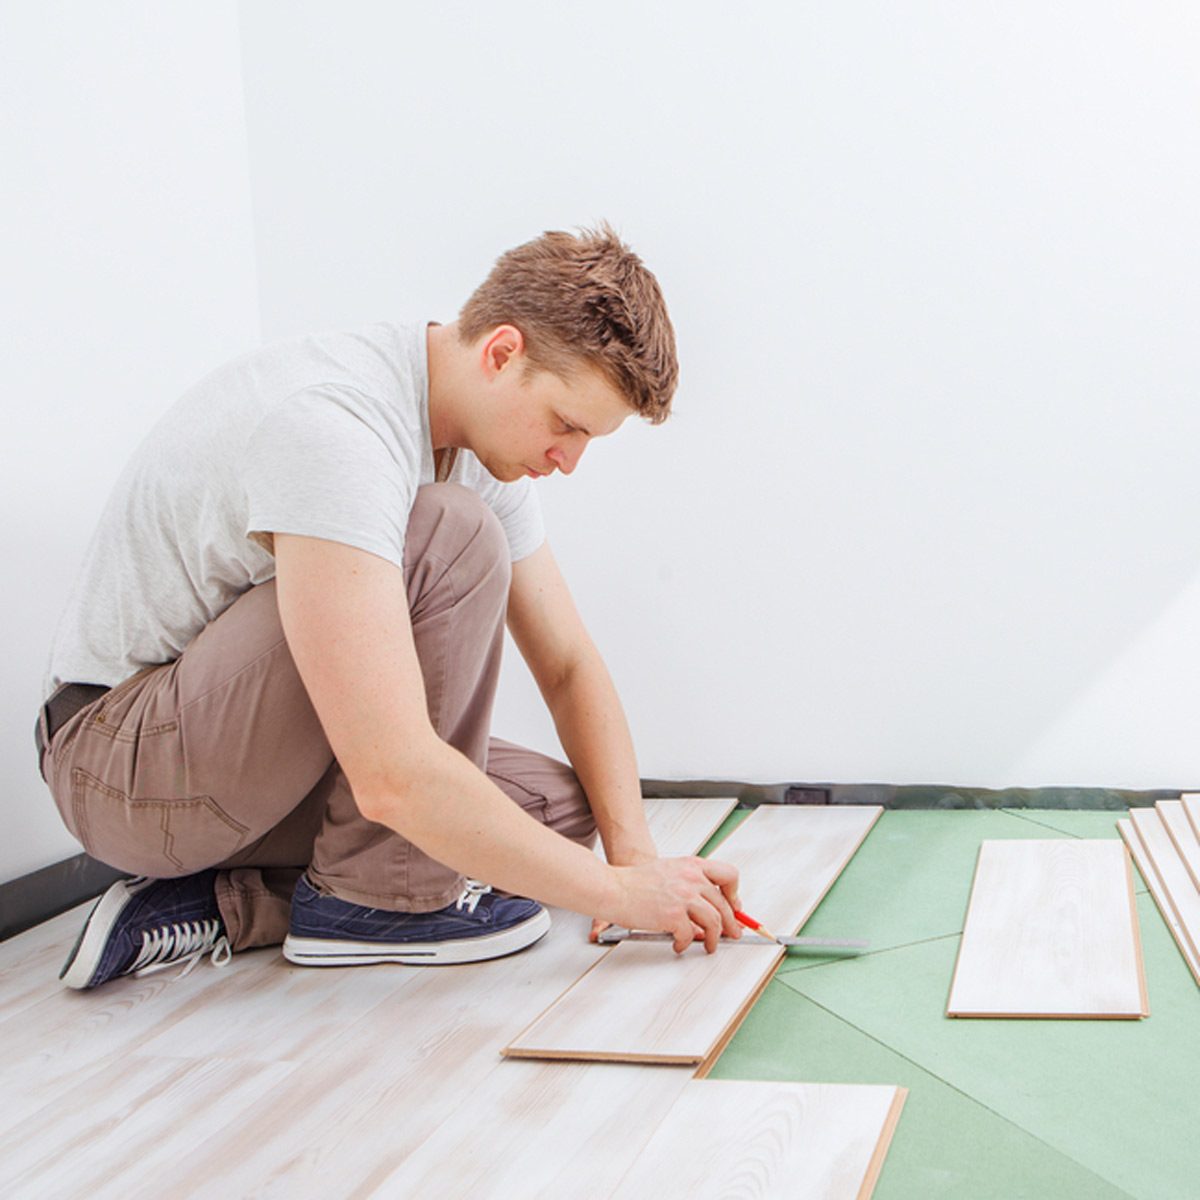 Best Flooring Guide: 9 Types of Floor Options for Your Home